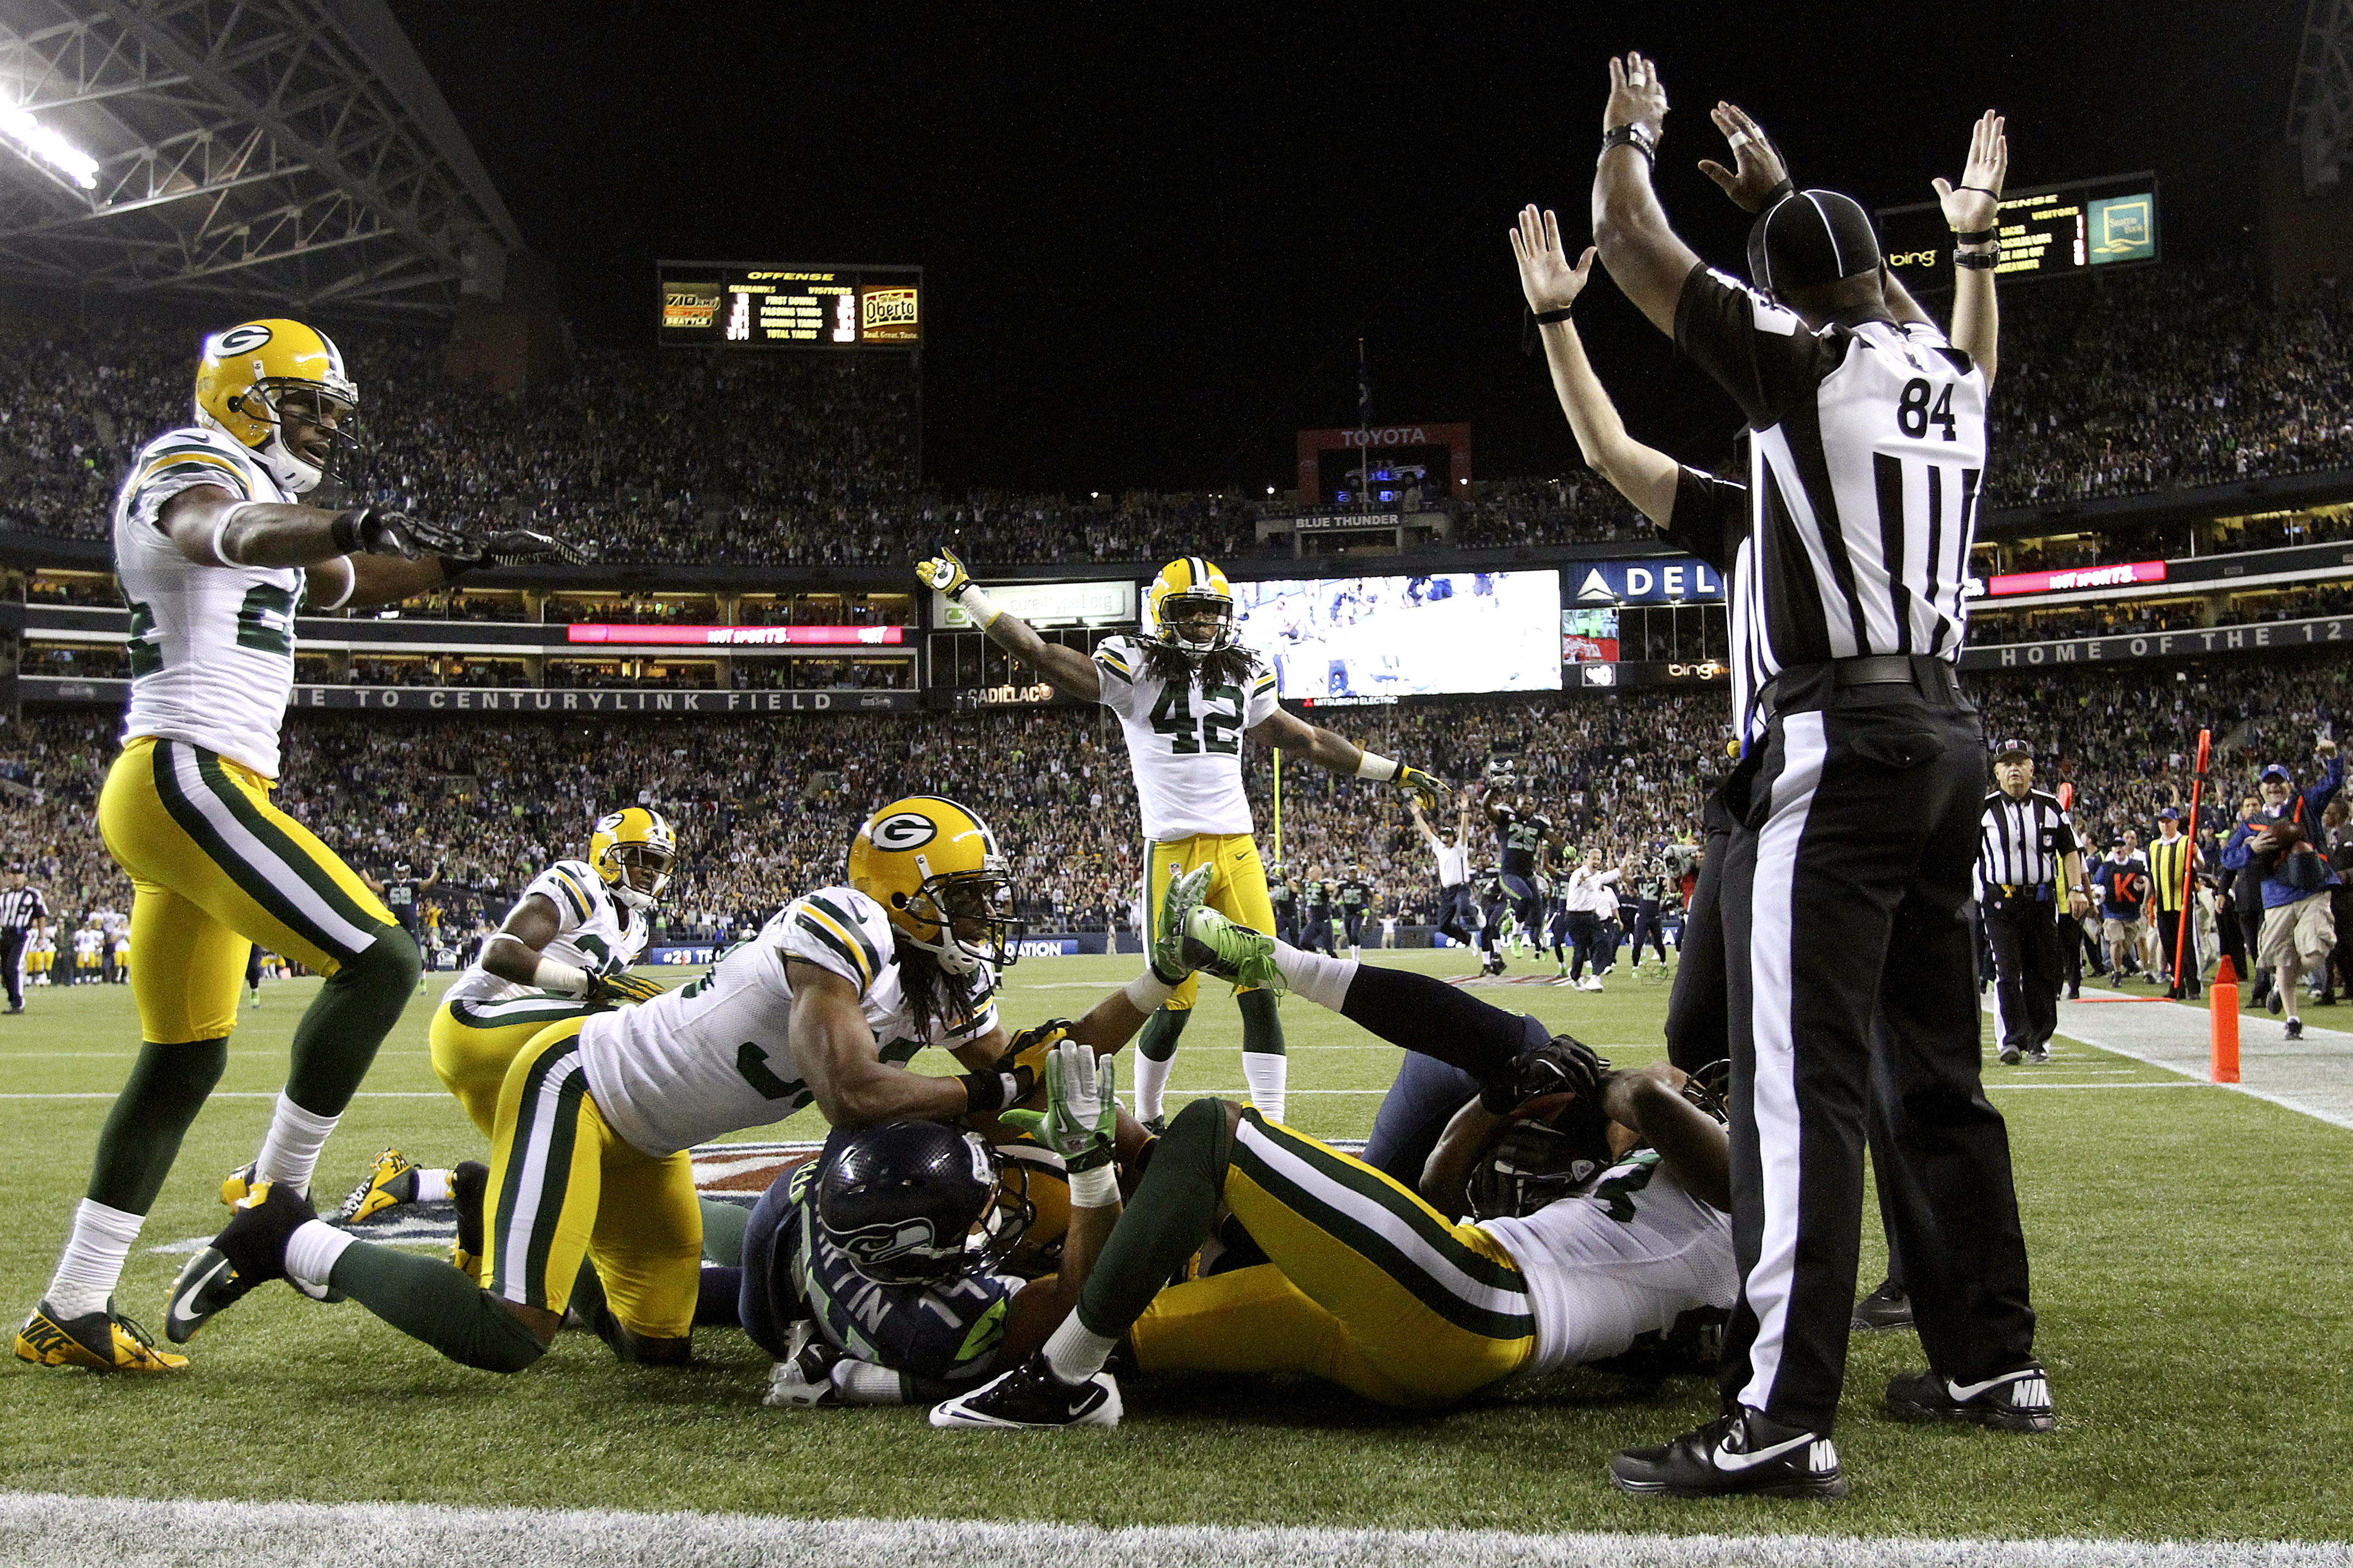 Referees signal different calls after Monday night's game-ending play. It was finally ruled a touchdown